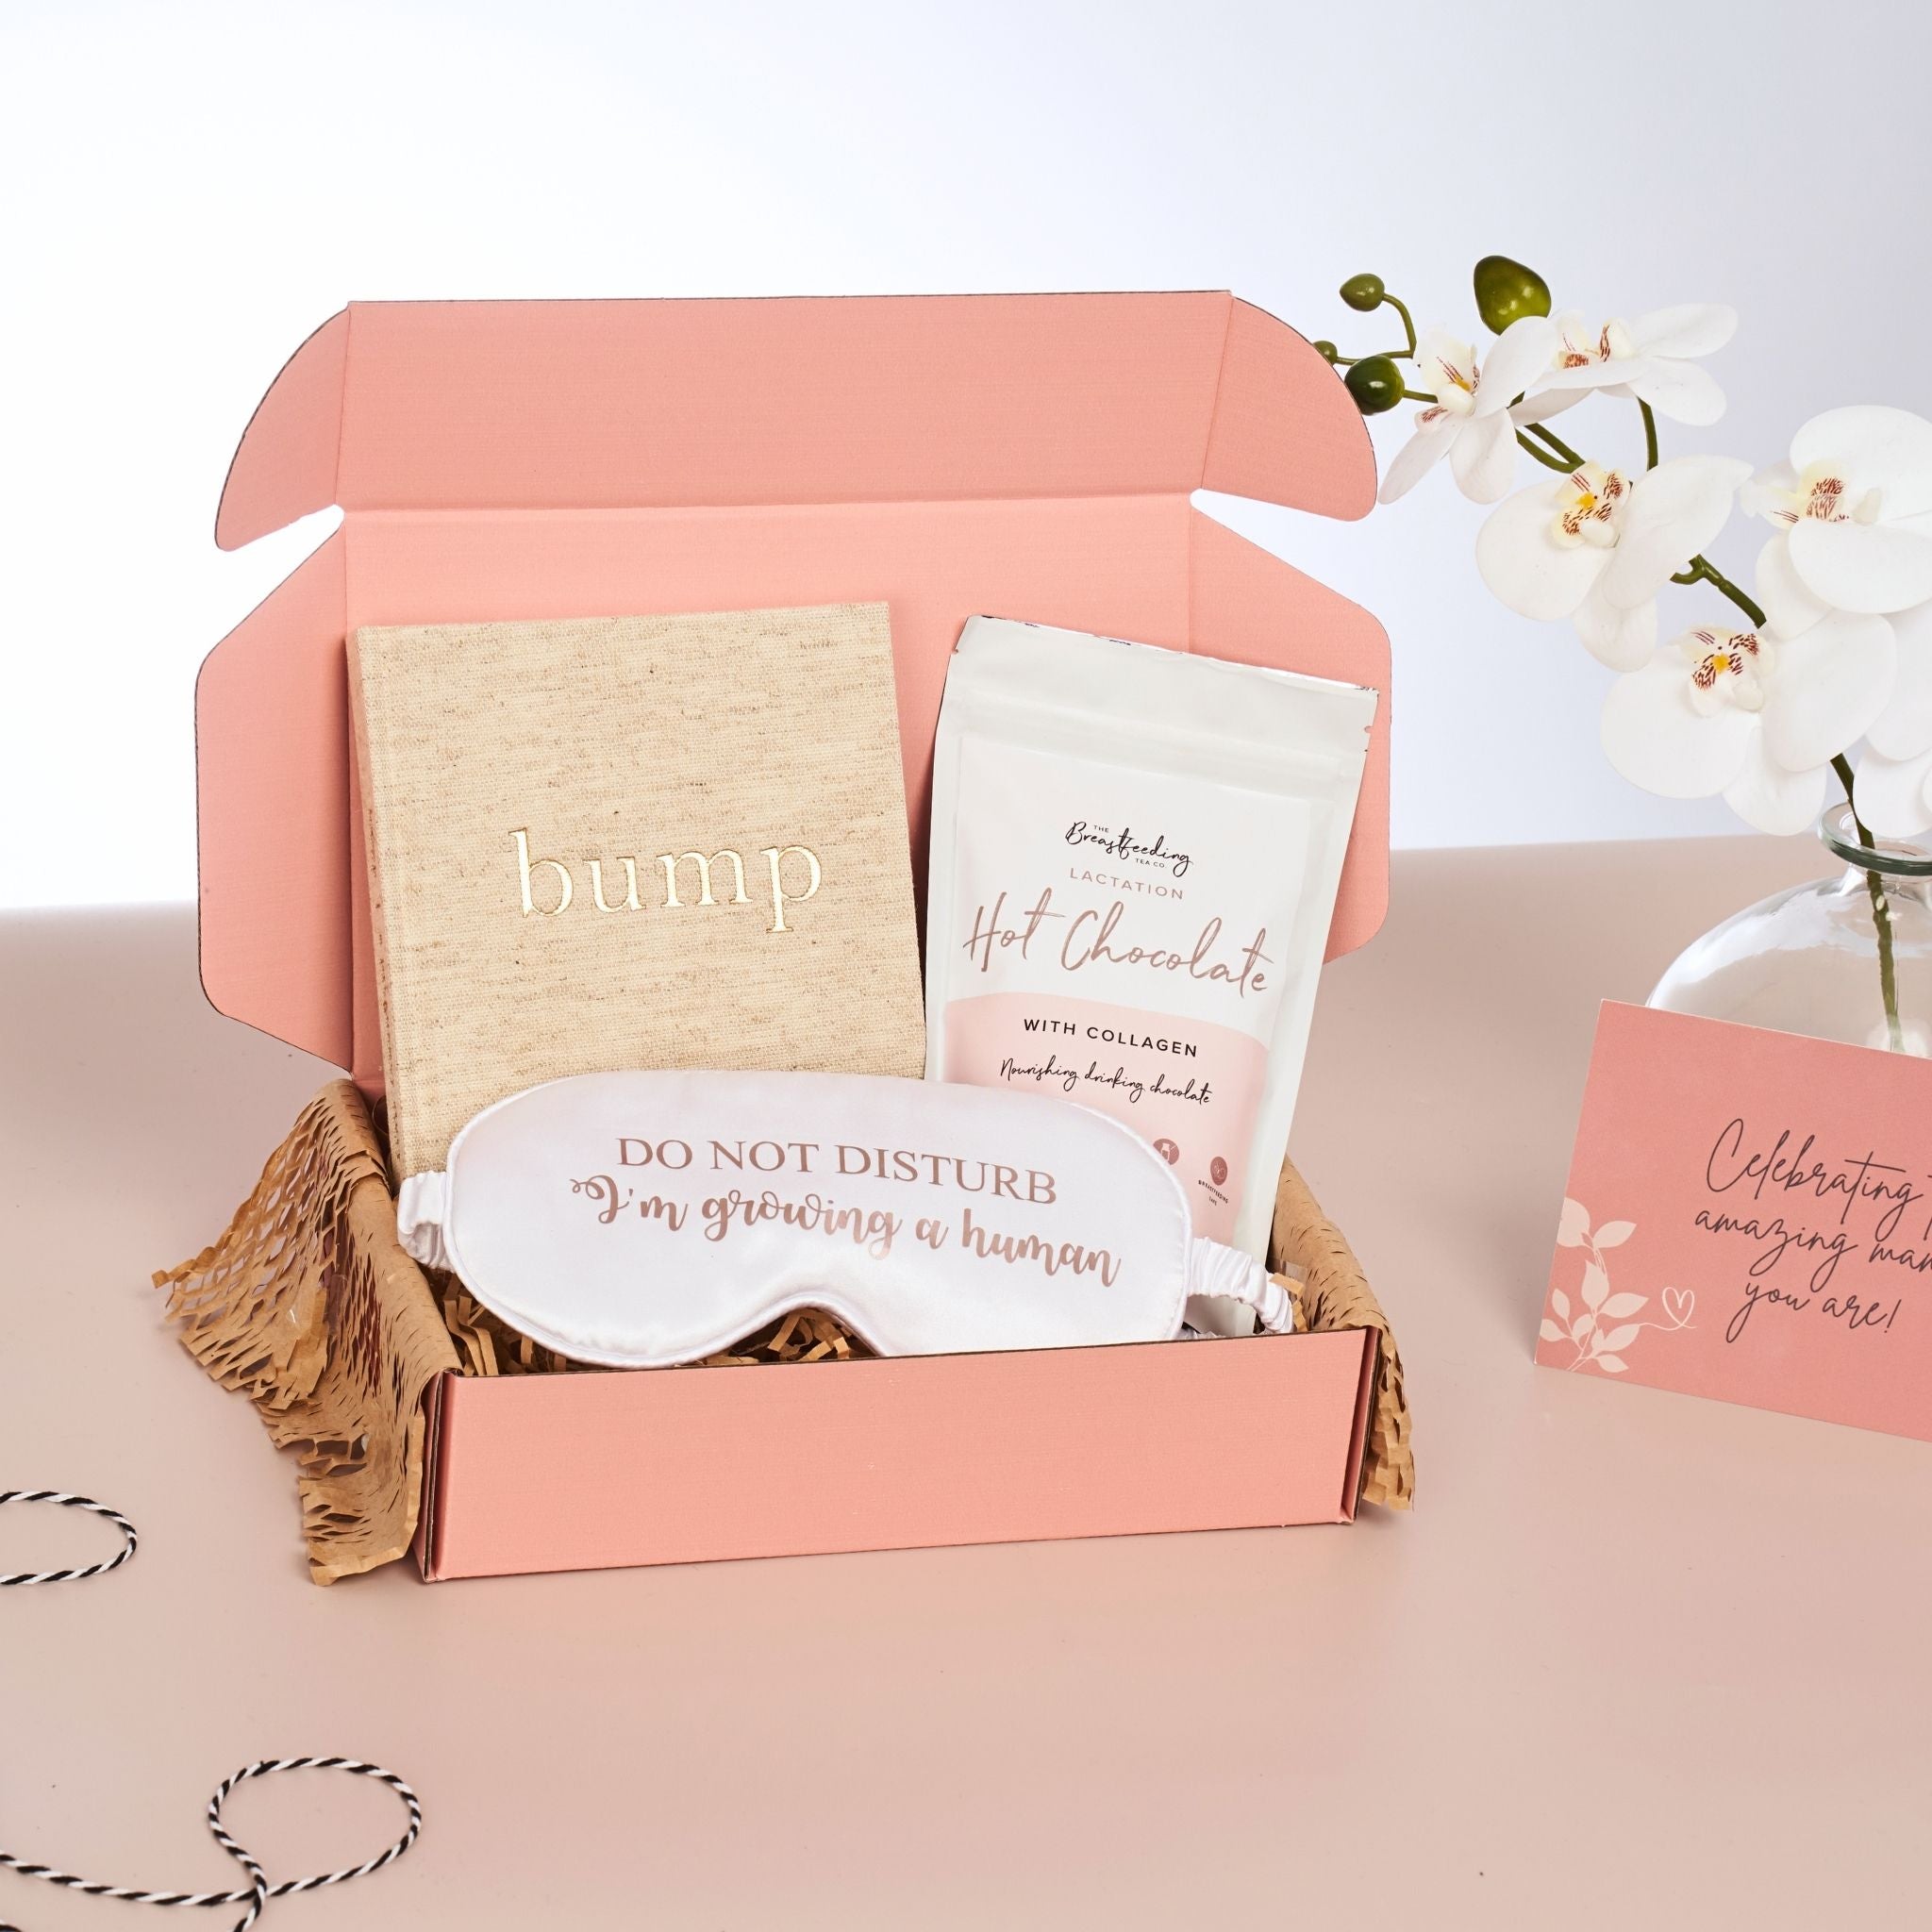 Pregnancy Gifts, Pamper Bundles and Mum and Baby essentials – Little  Seedling